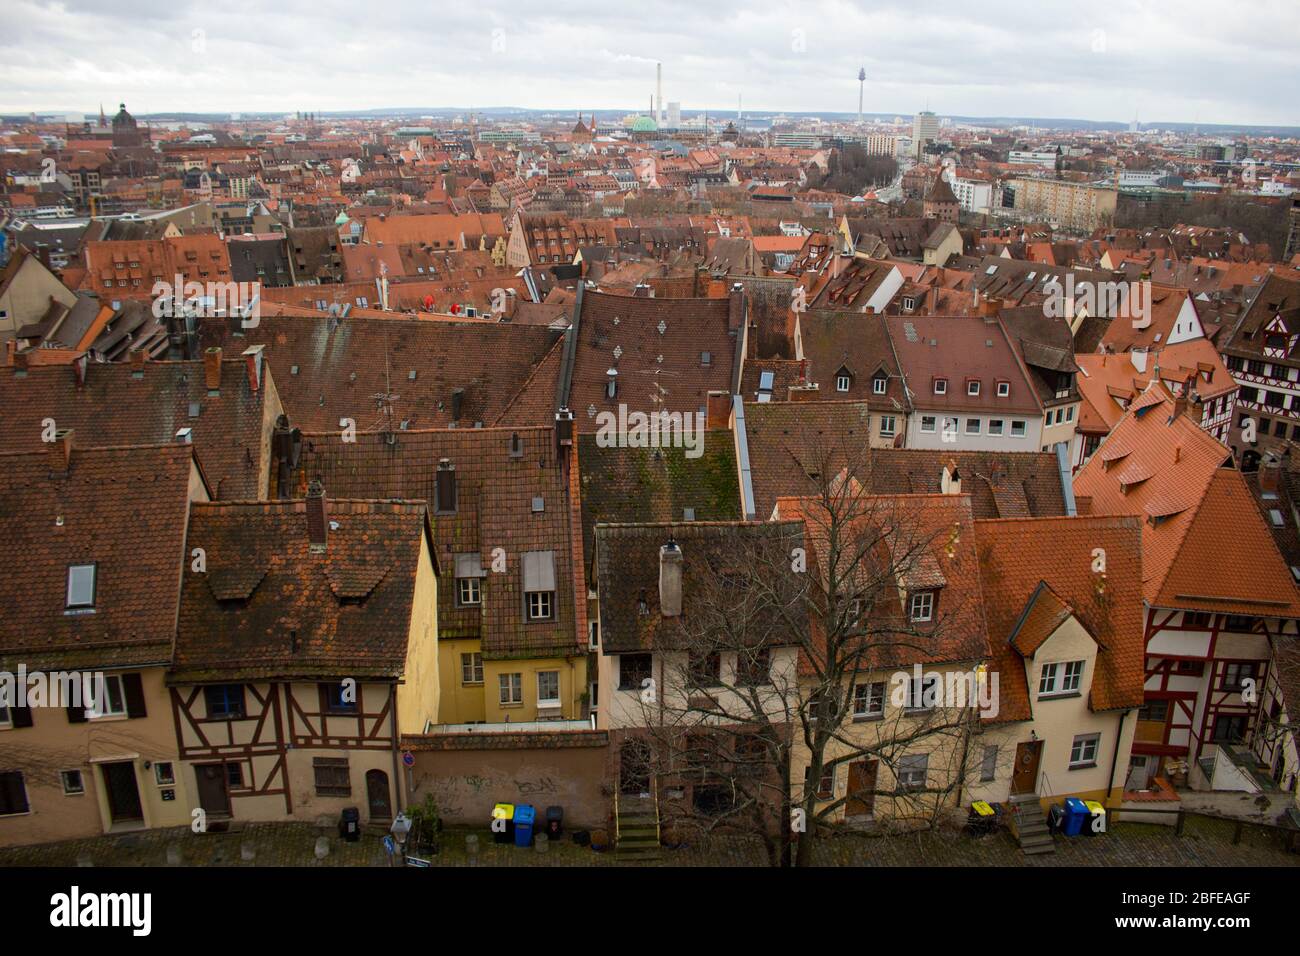 The red rooves of Nuremberg. Stock Photo